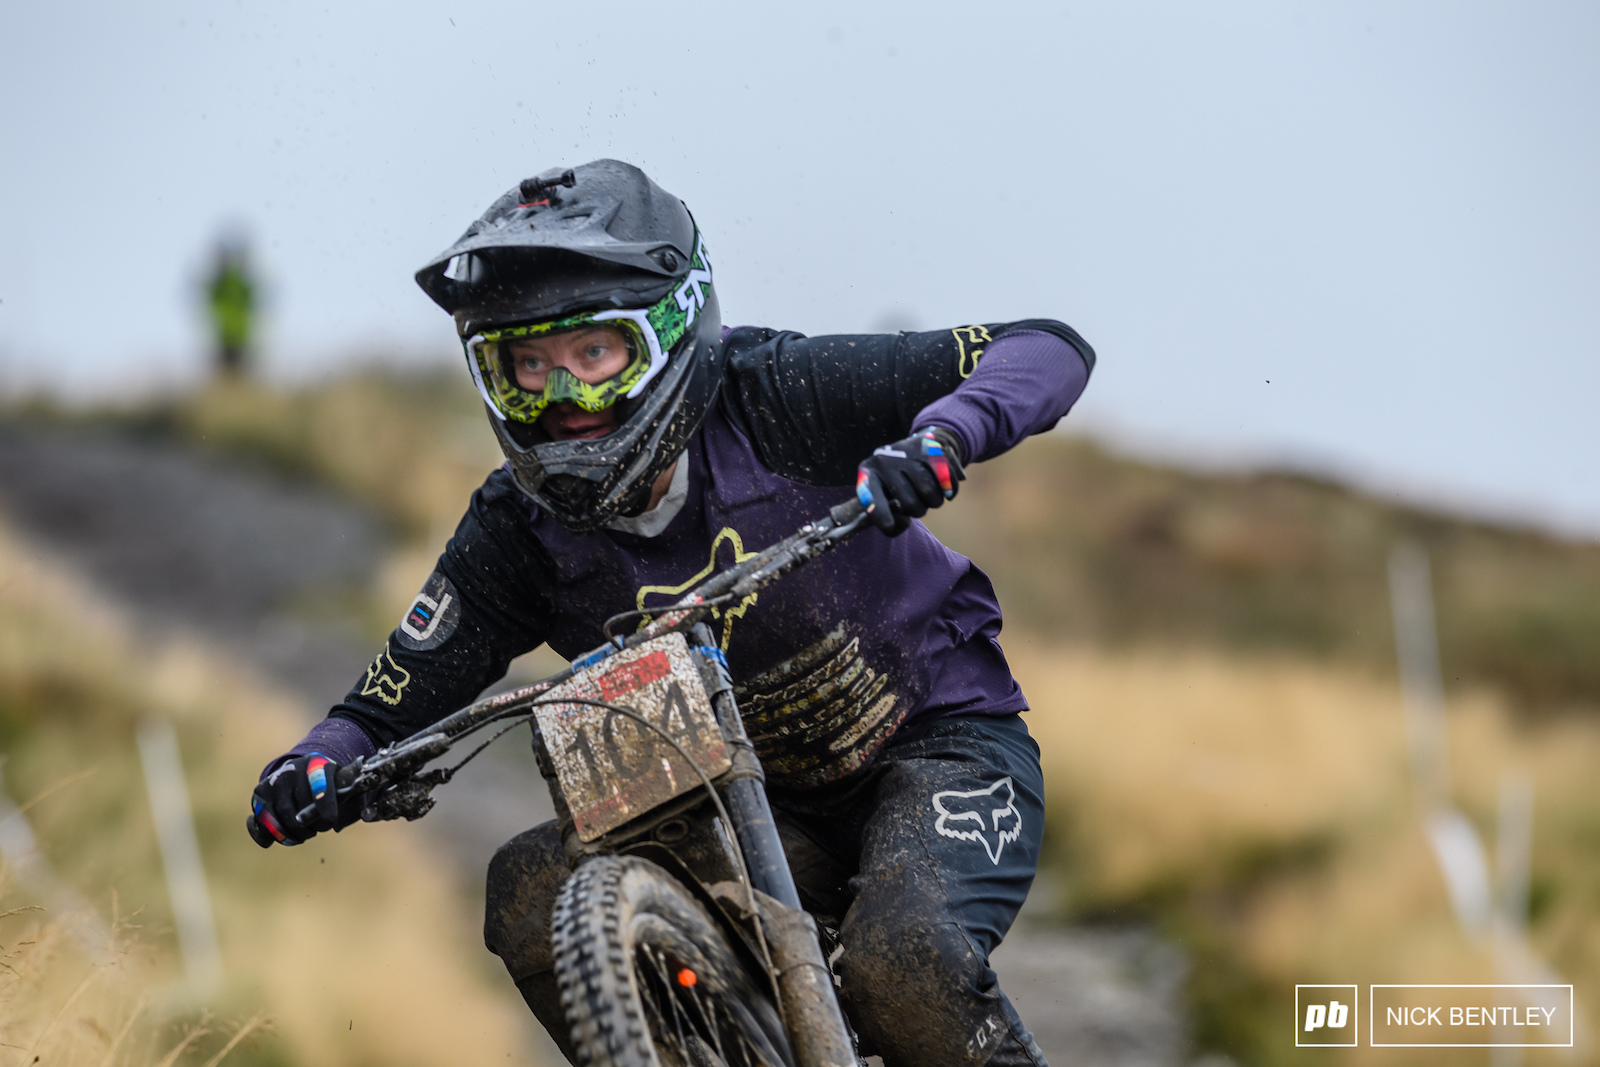 Stacey Fisher currently in second place in the overall standings seemed determined today to claim the number one spot tomorrow